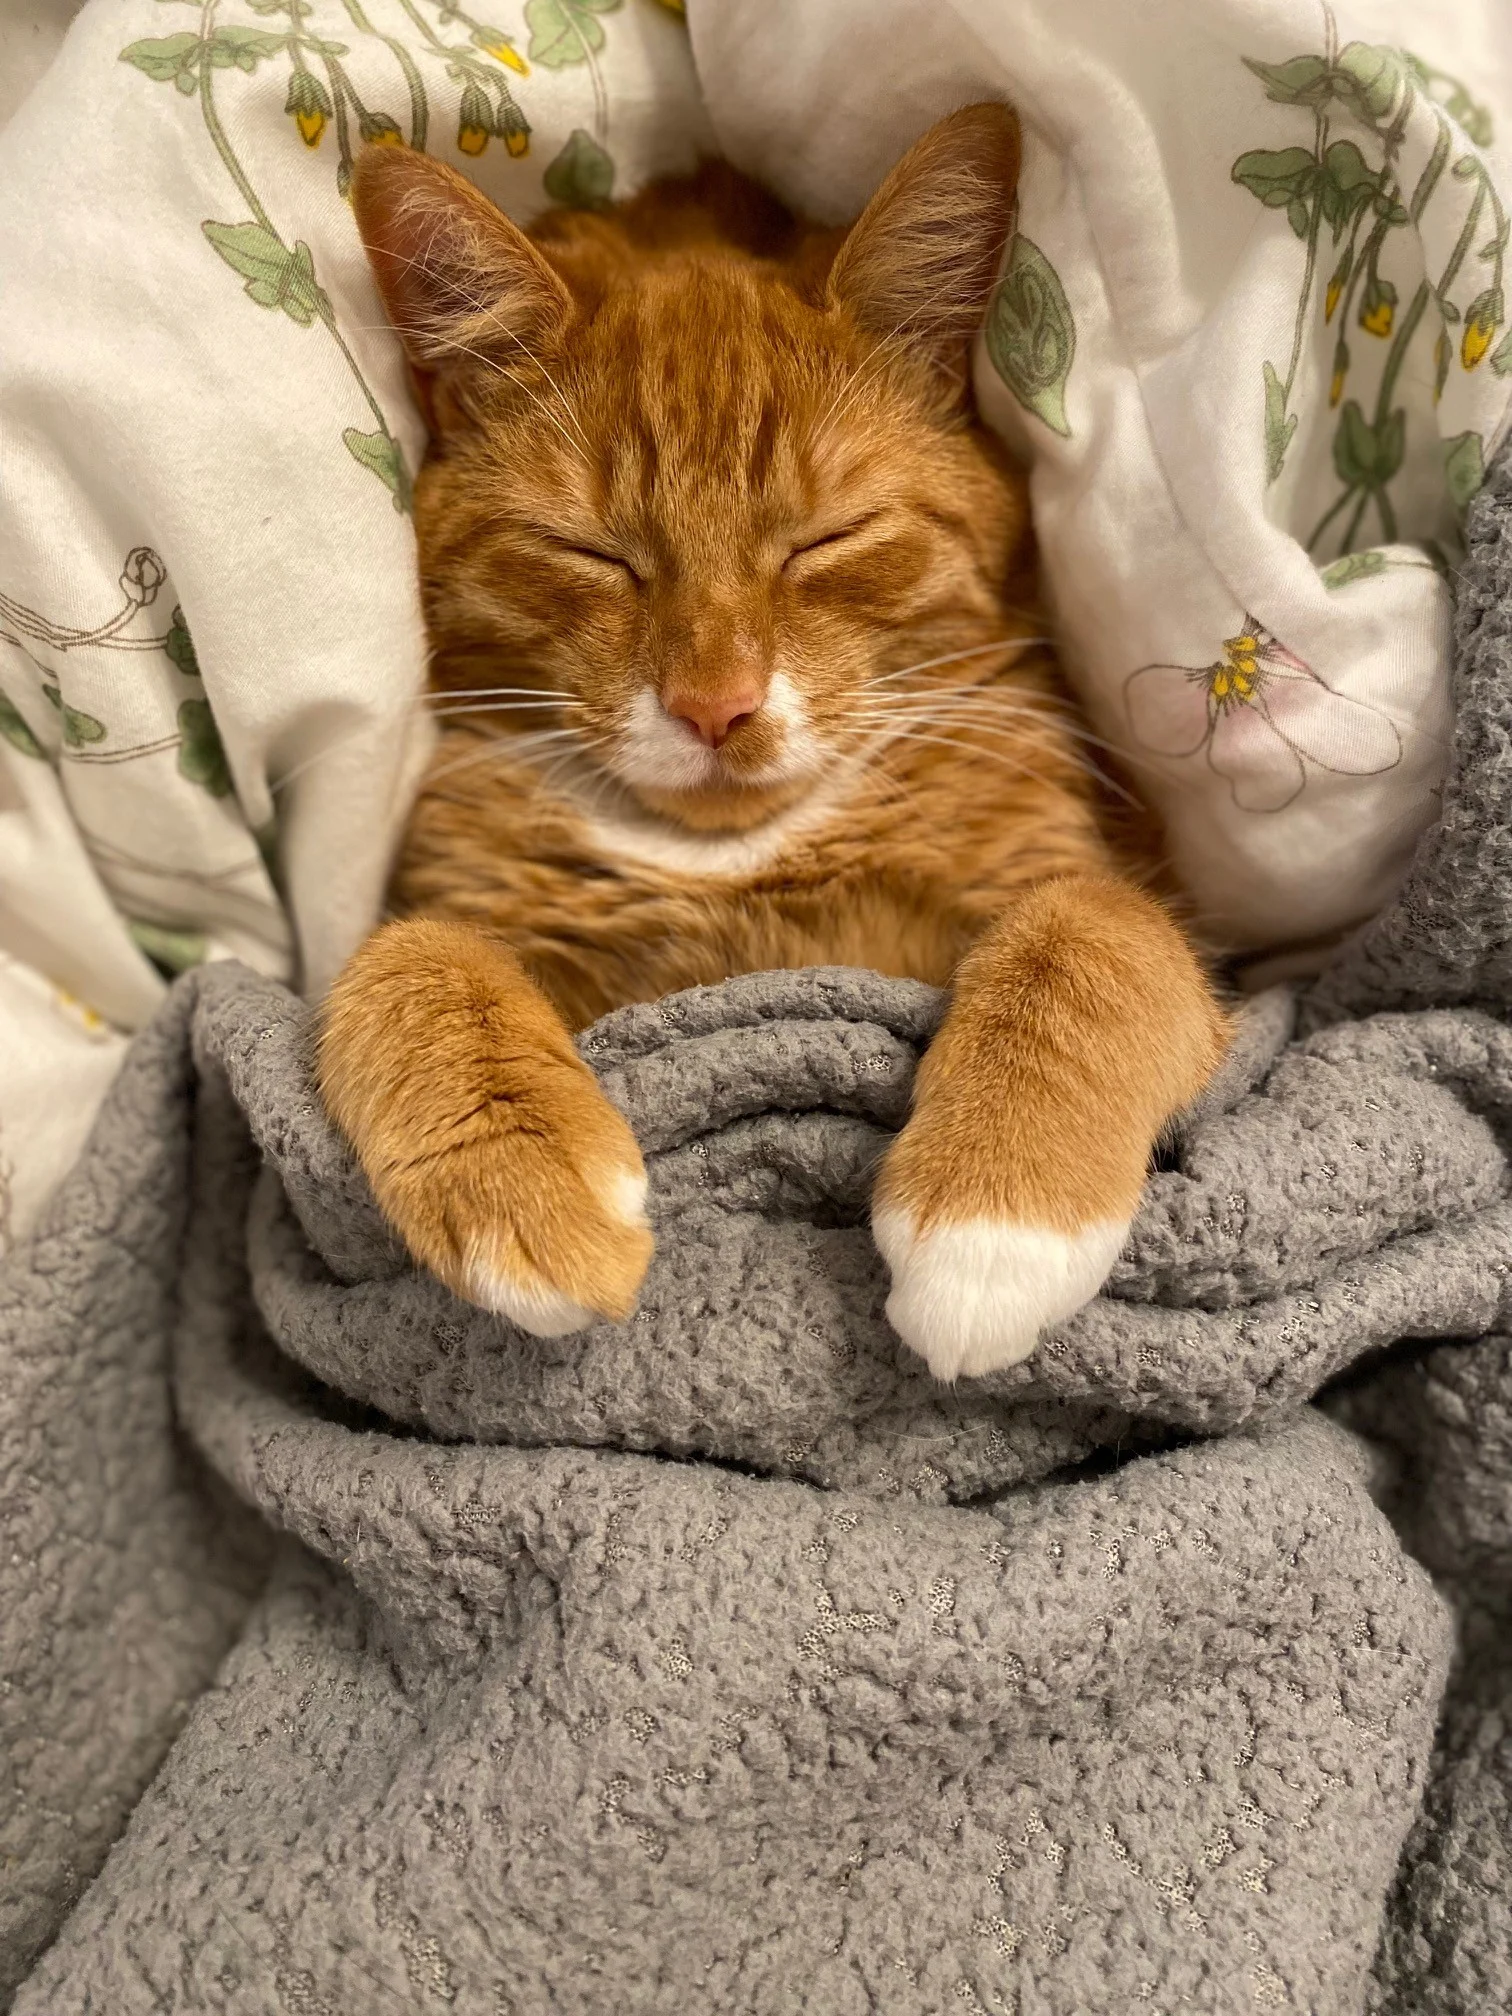 Orange tabby with white chin and paws tucked in under blankets and napping